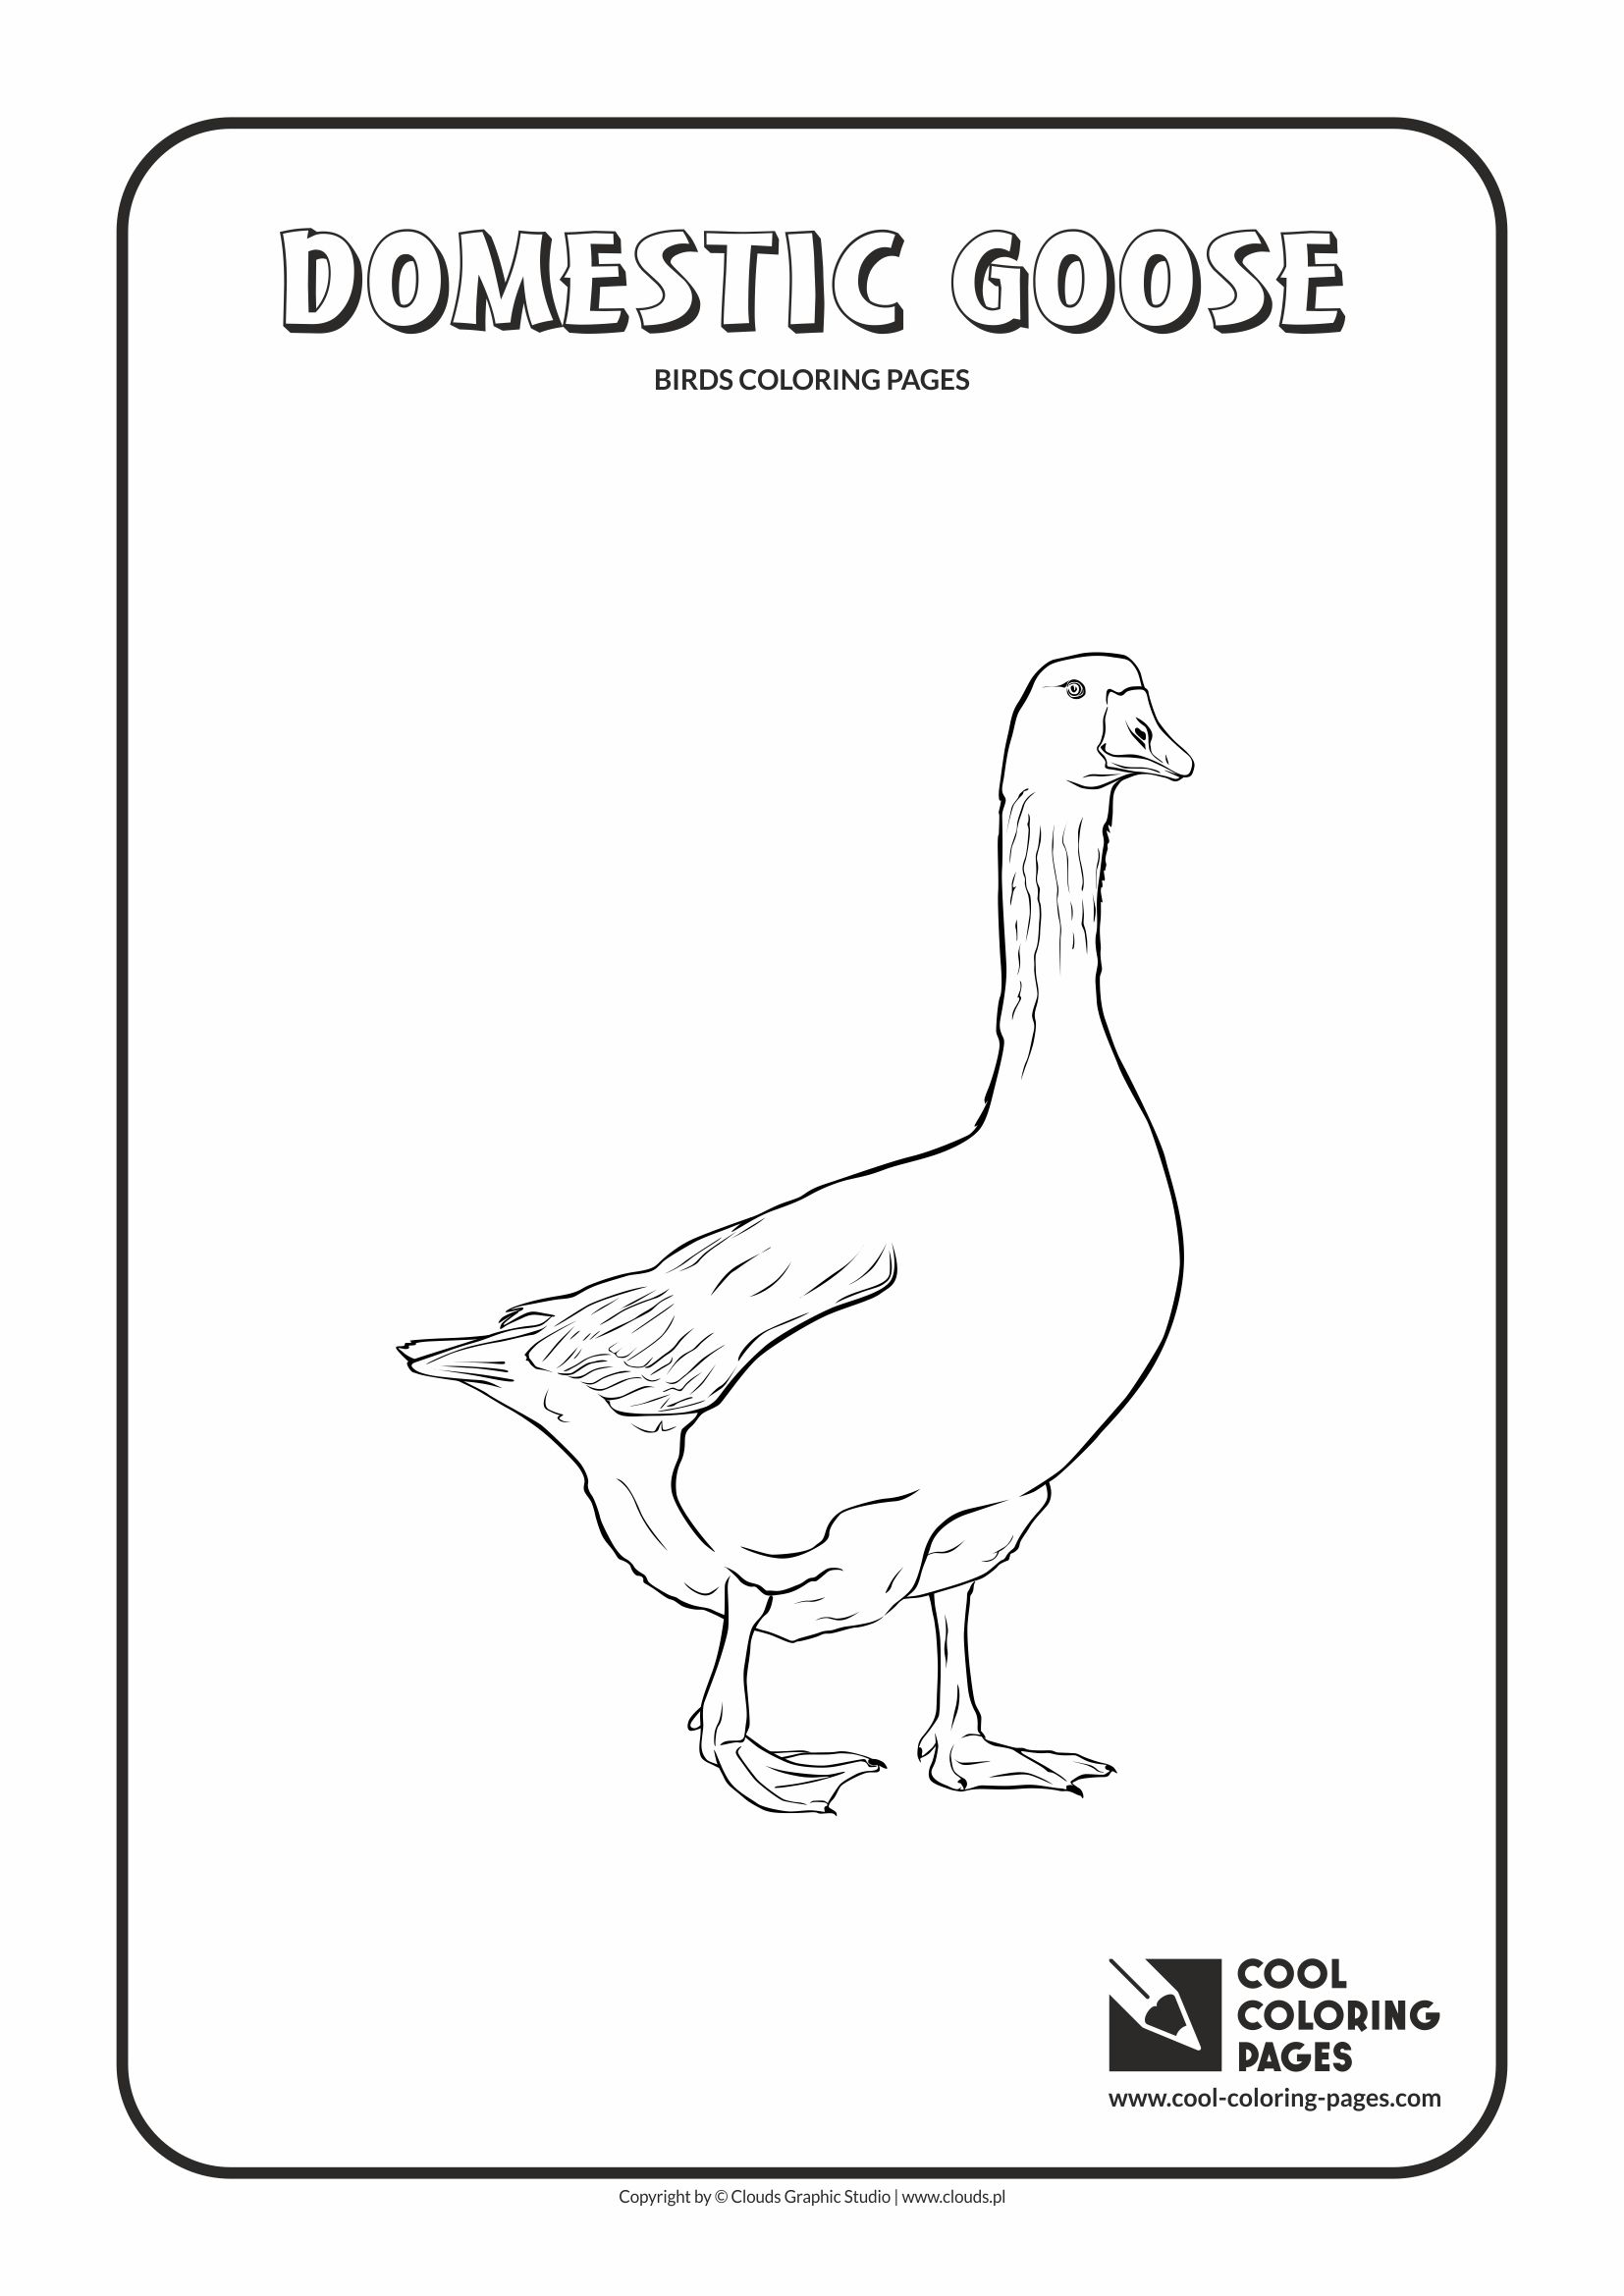 Cool Coloring Pages - Animals / Domestic goose / Coloring page with domestic goose